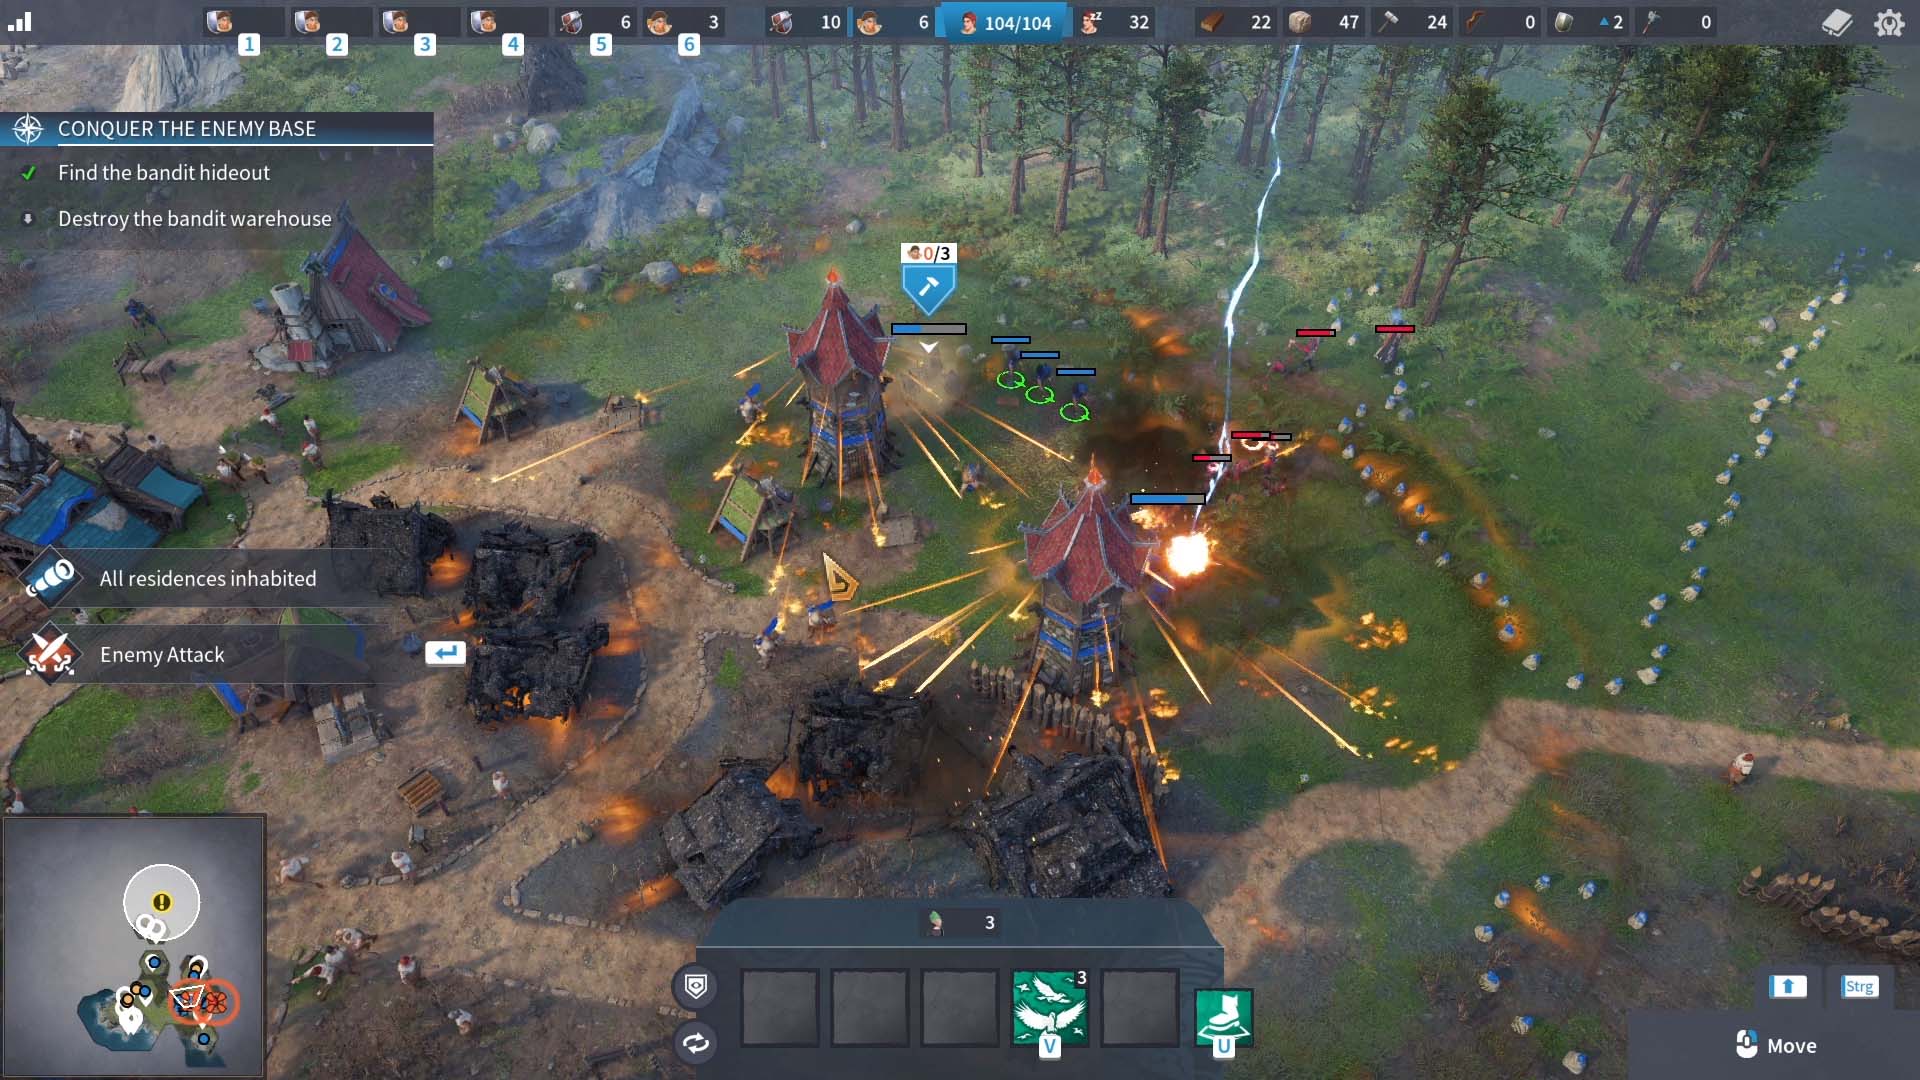 Tower repels invaders in The Settlers: New Allies